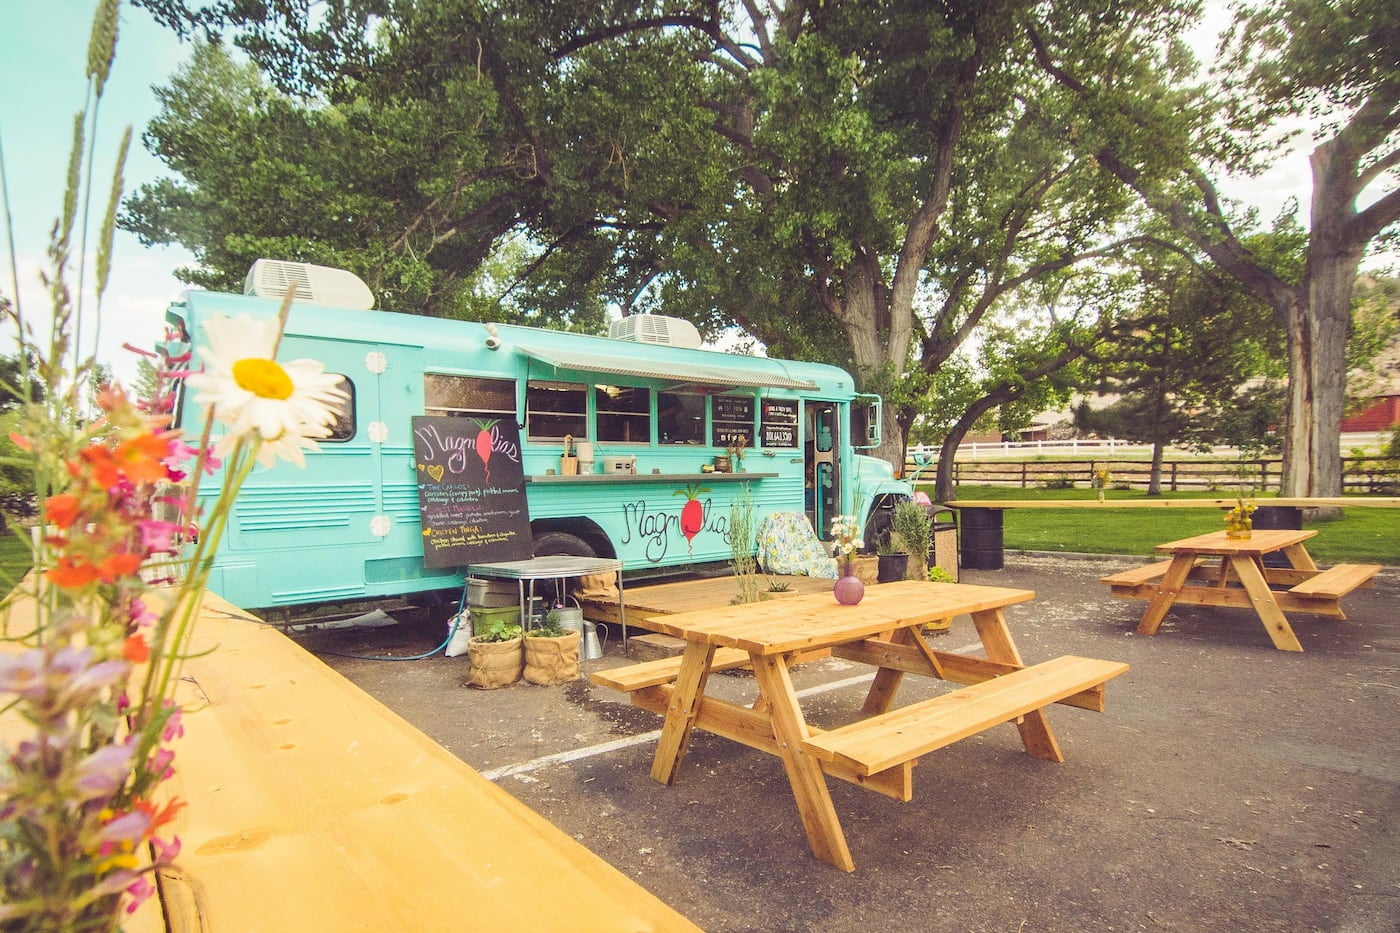 Magnolia's teal bus converted into a food truck.